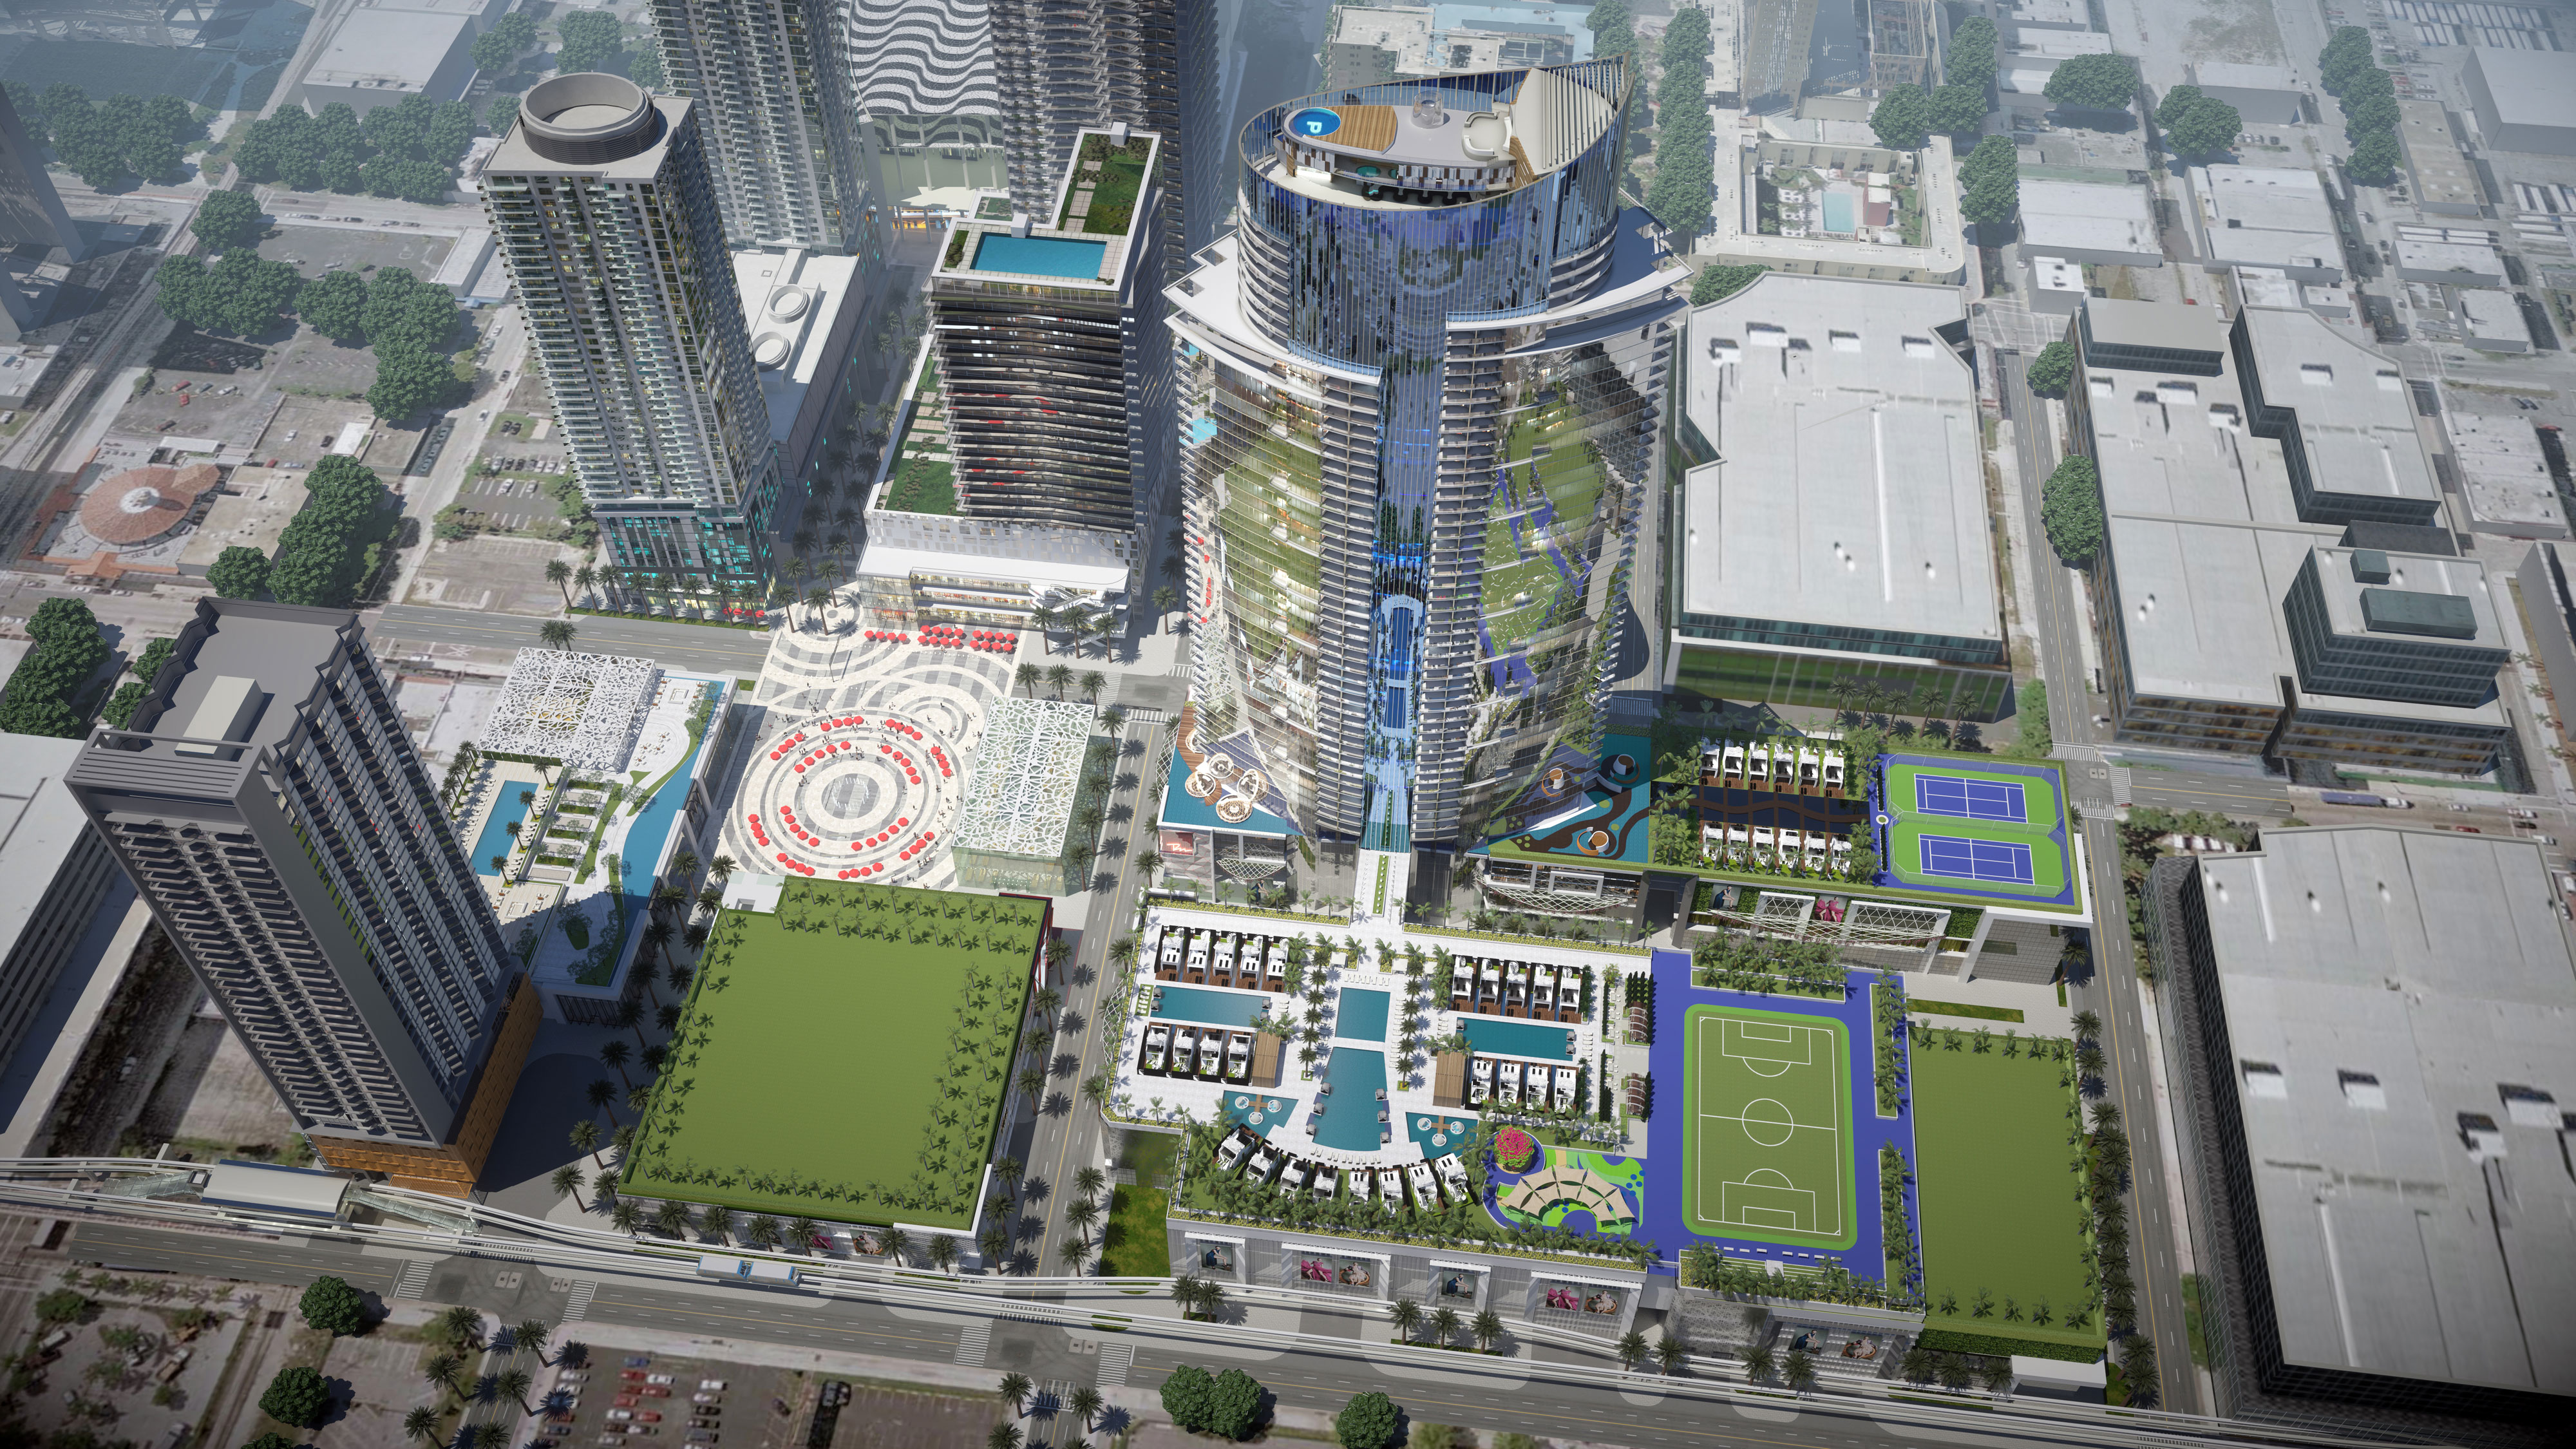 The property will be part of the Miami Worldcenter a mixed-use development going up in the citys Park West neighborhood